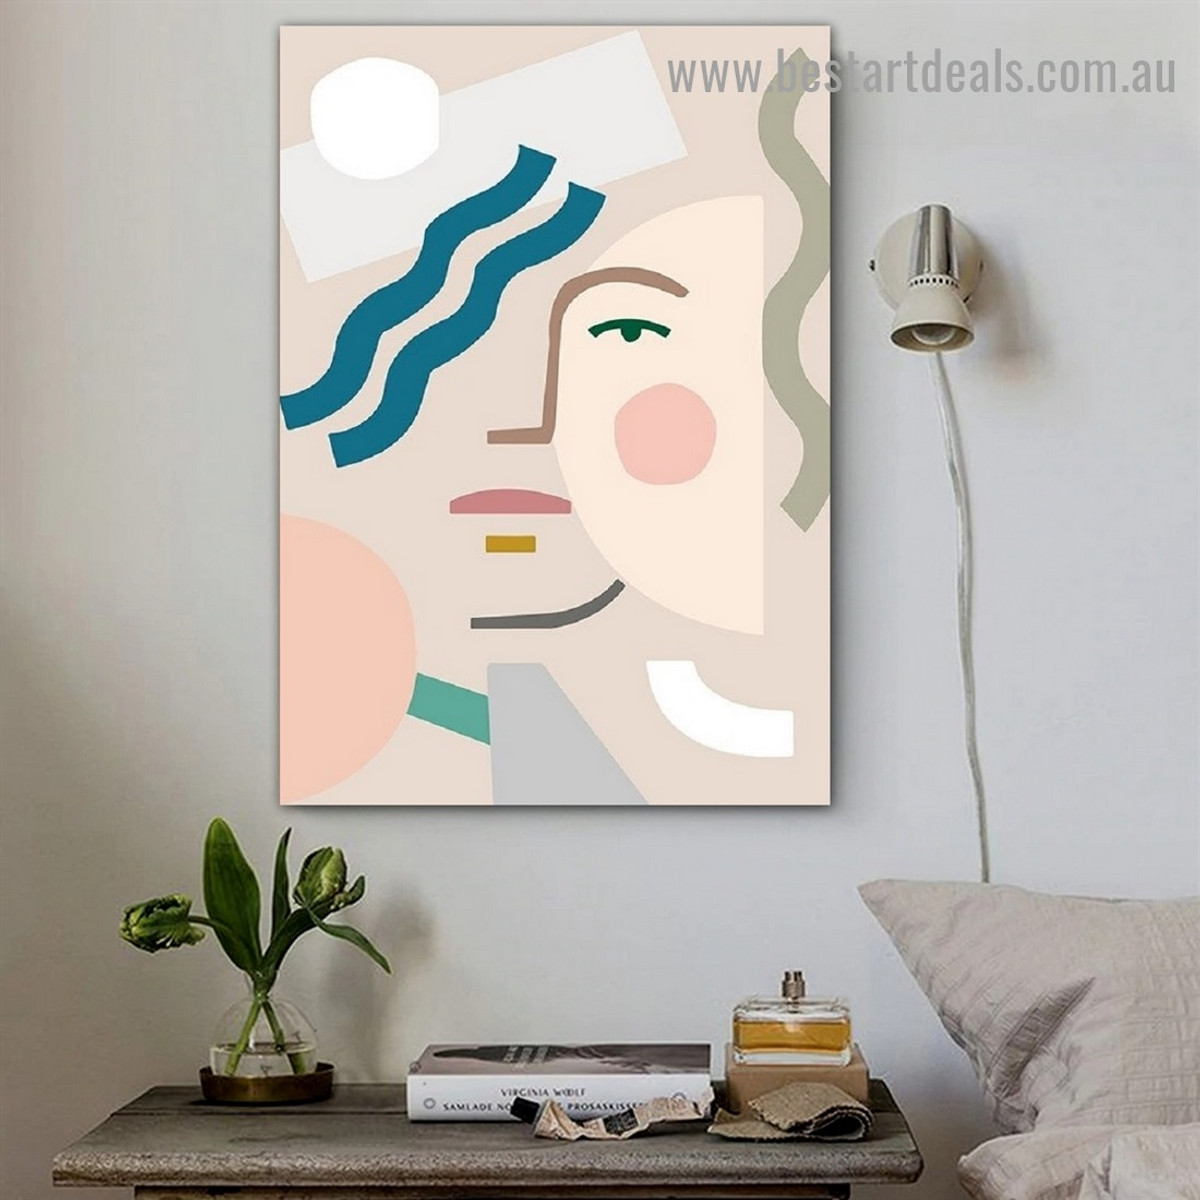 Geometric Face Abstract Scandinavian Framed Artwork Image Canvas Print for Room Wall Décor